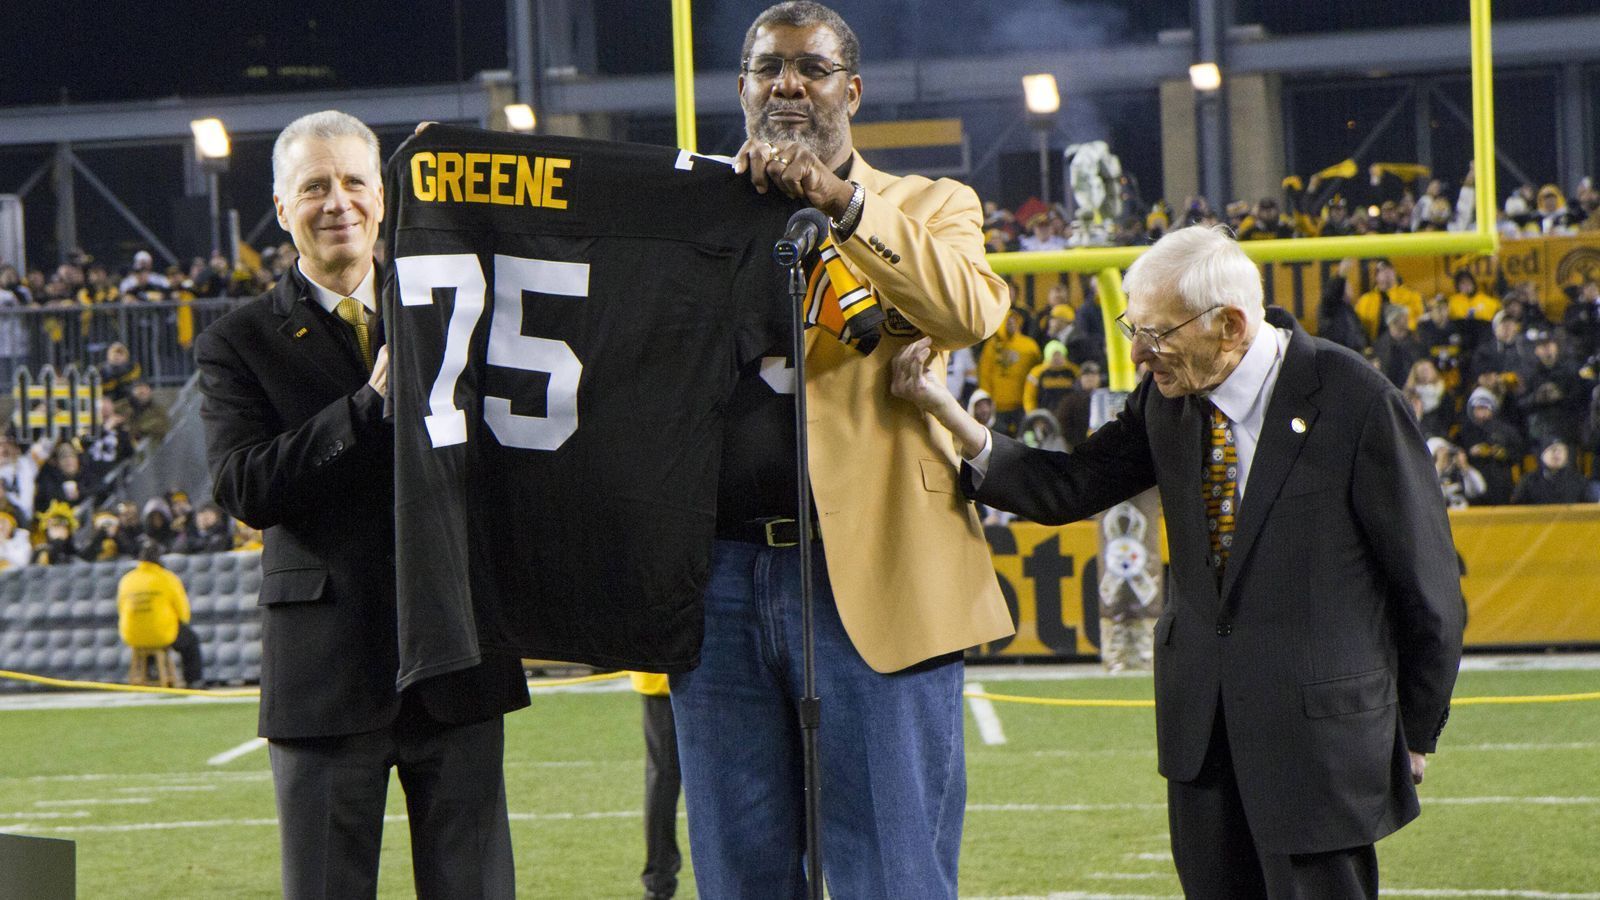 
                <strong>Joe Greene</strong><br>
                Aktiv: 1969 - 1981Position: Defensive TackleTeam: Pittsburgh SteelersErfolge: 4x Super Bowl-Sieger, 10x Pro Bowl, 2x Defensive Player of the Year
              